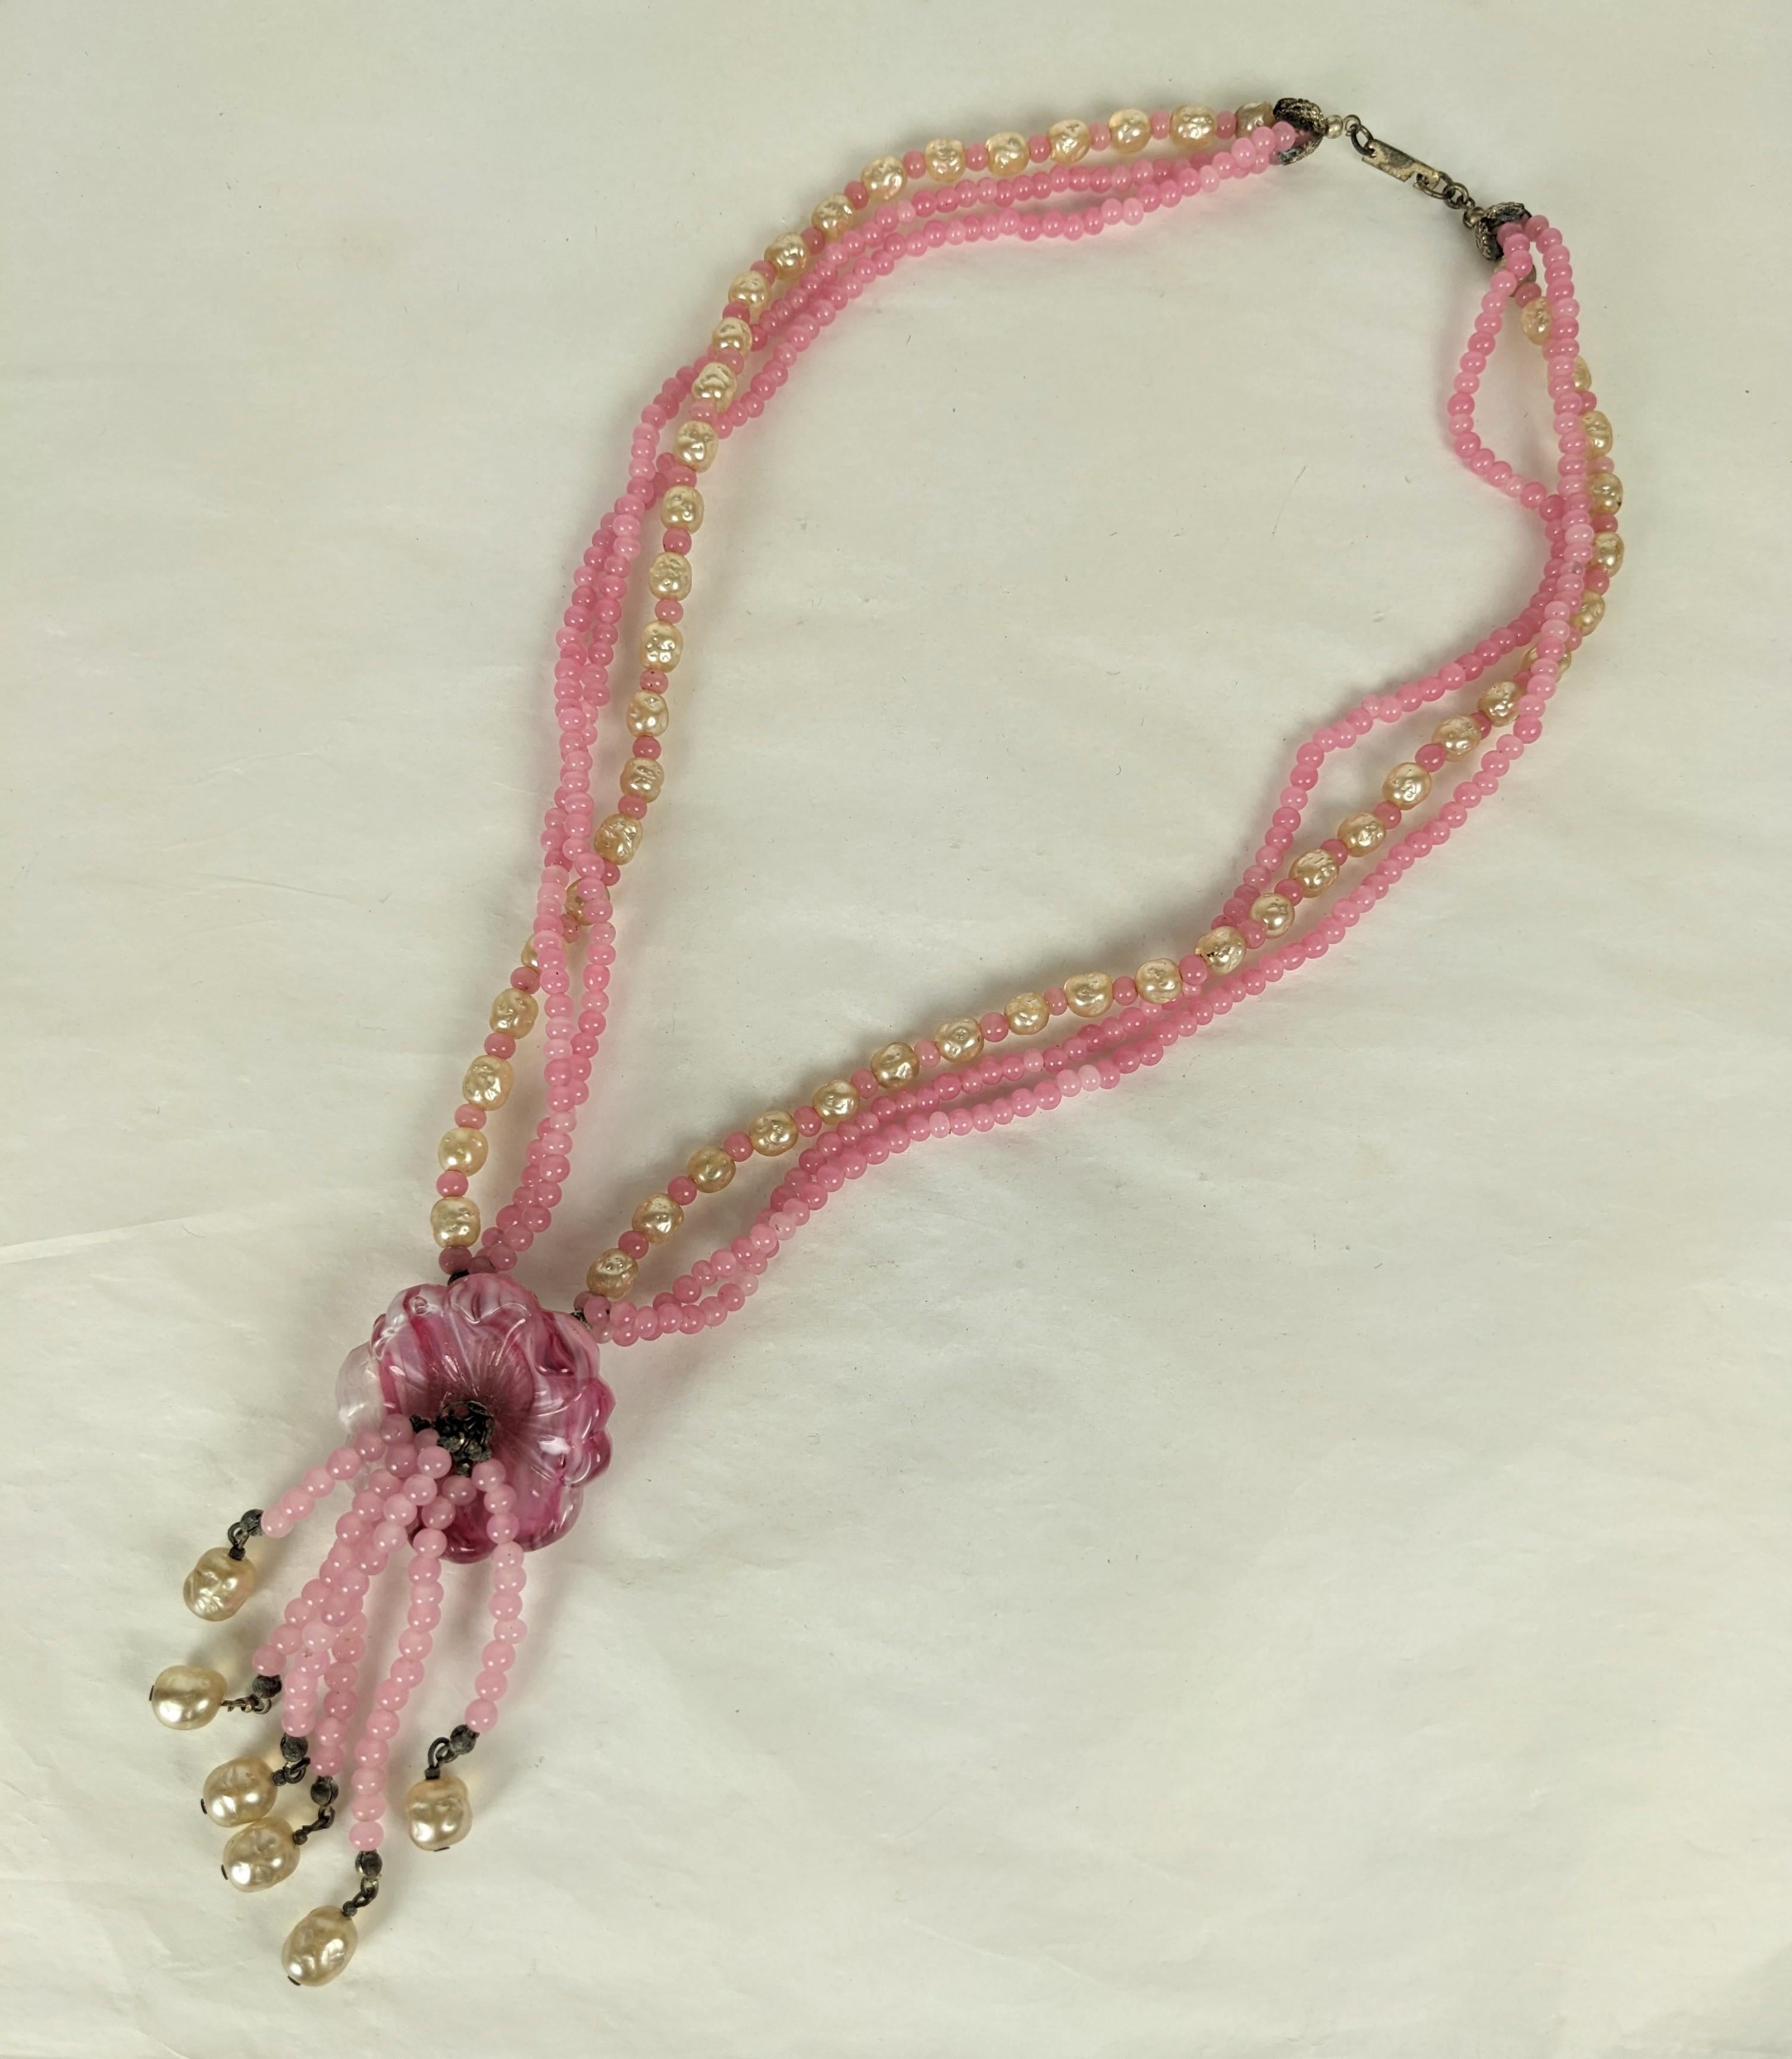 Lovely Miriam Haskell 3 strand torsade necklace of rose pink Gripoix pate de verre glass beads mixed with signature baroque pearls and silver gilt plate filigrees. Molded glass flower with 5 strand pendant center tassel. Signed Miriam Haskell on